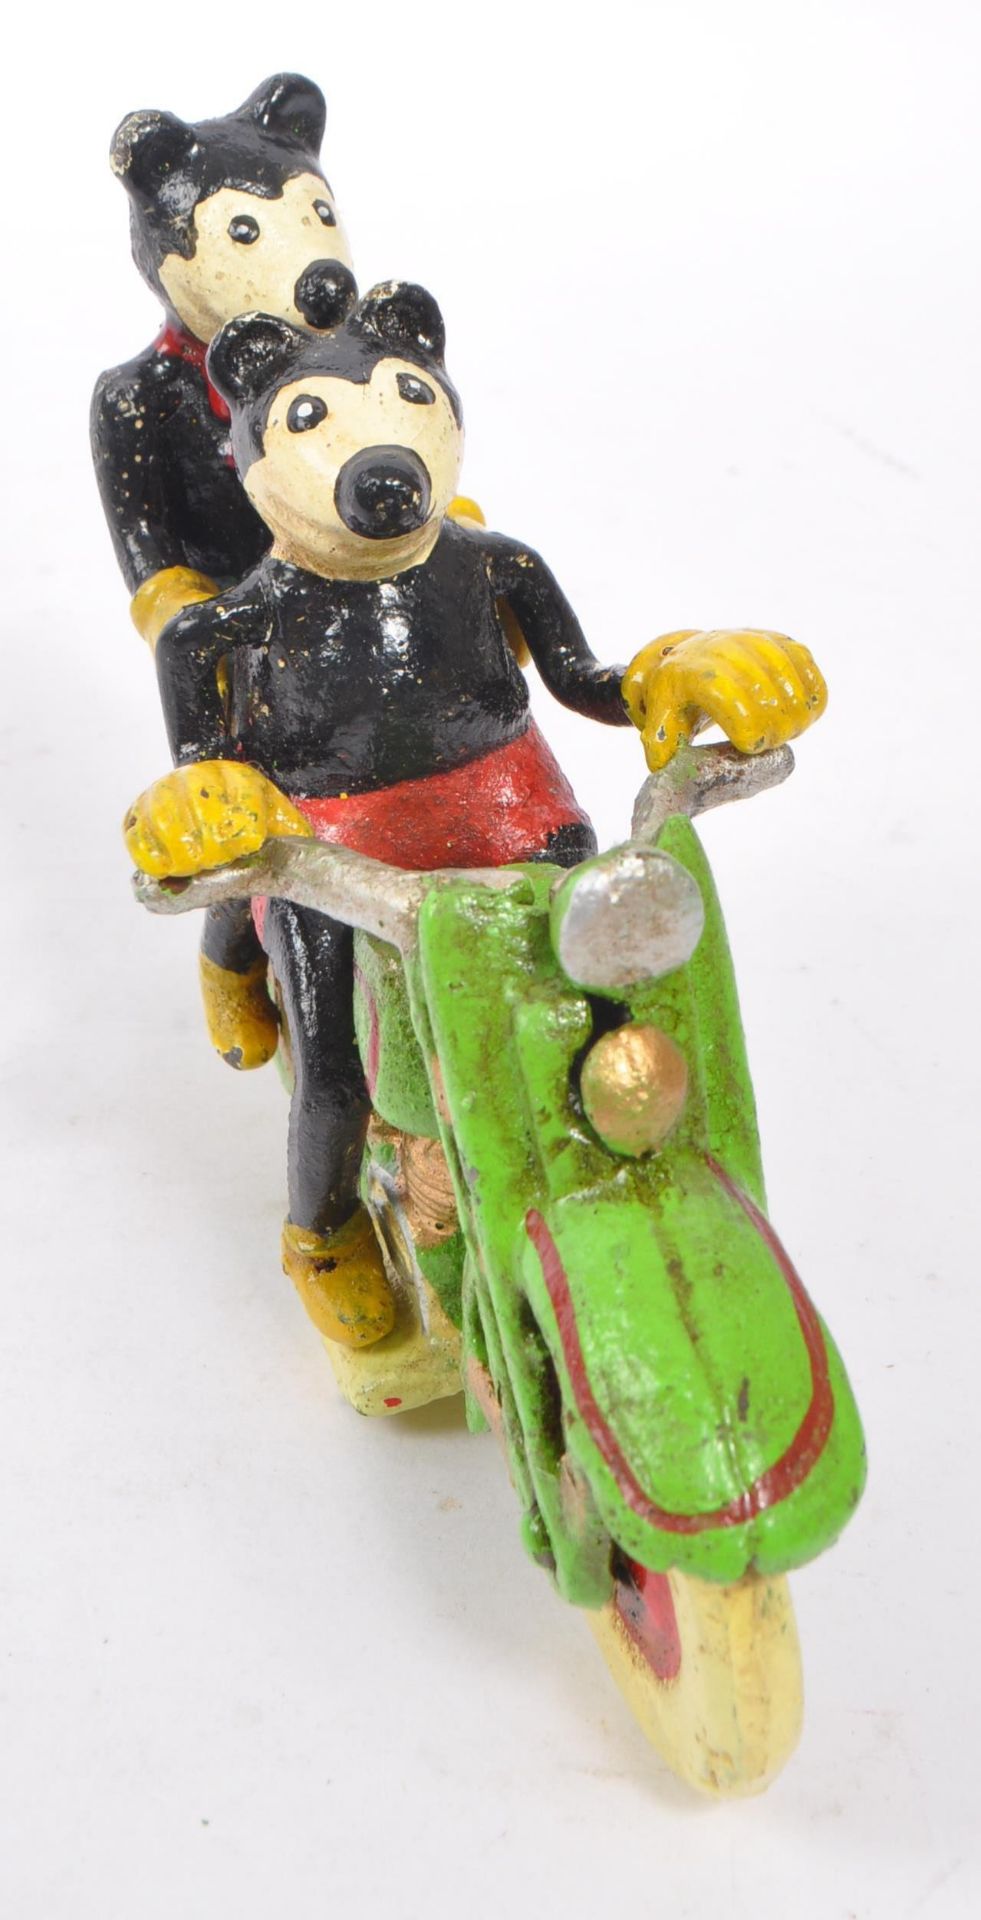 CAST IRON MICKEY AND MINNIE MOUSE ON MOTORCYCLE - Image 2 of 4